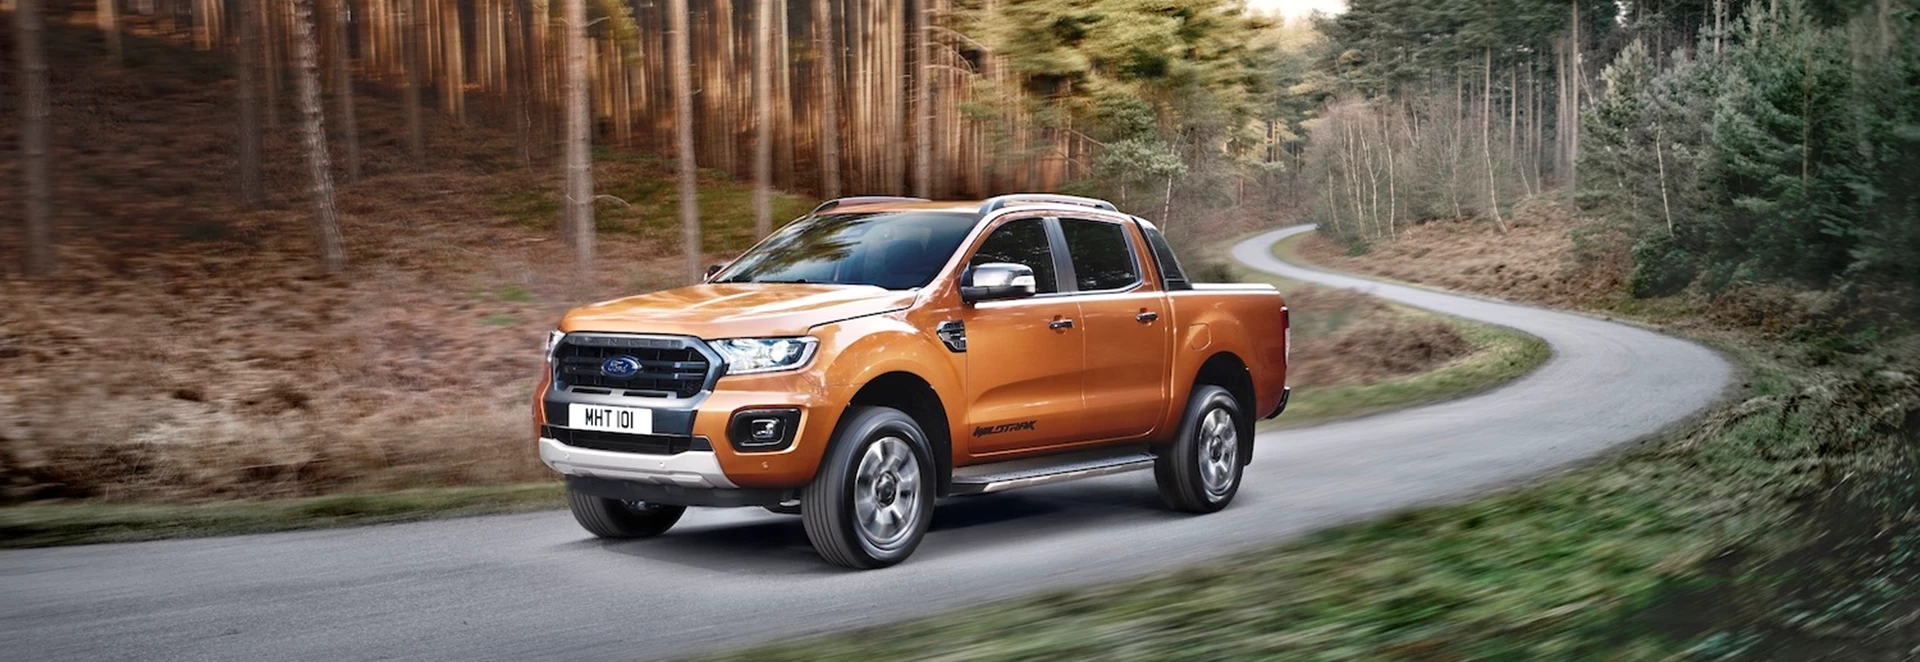 Ford Ranger pick-up updated for 2019